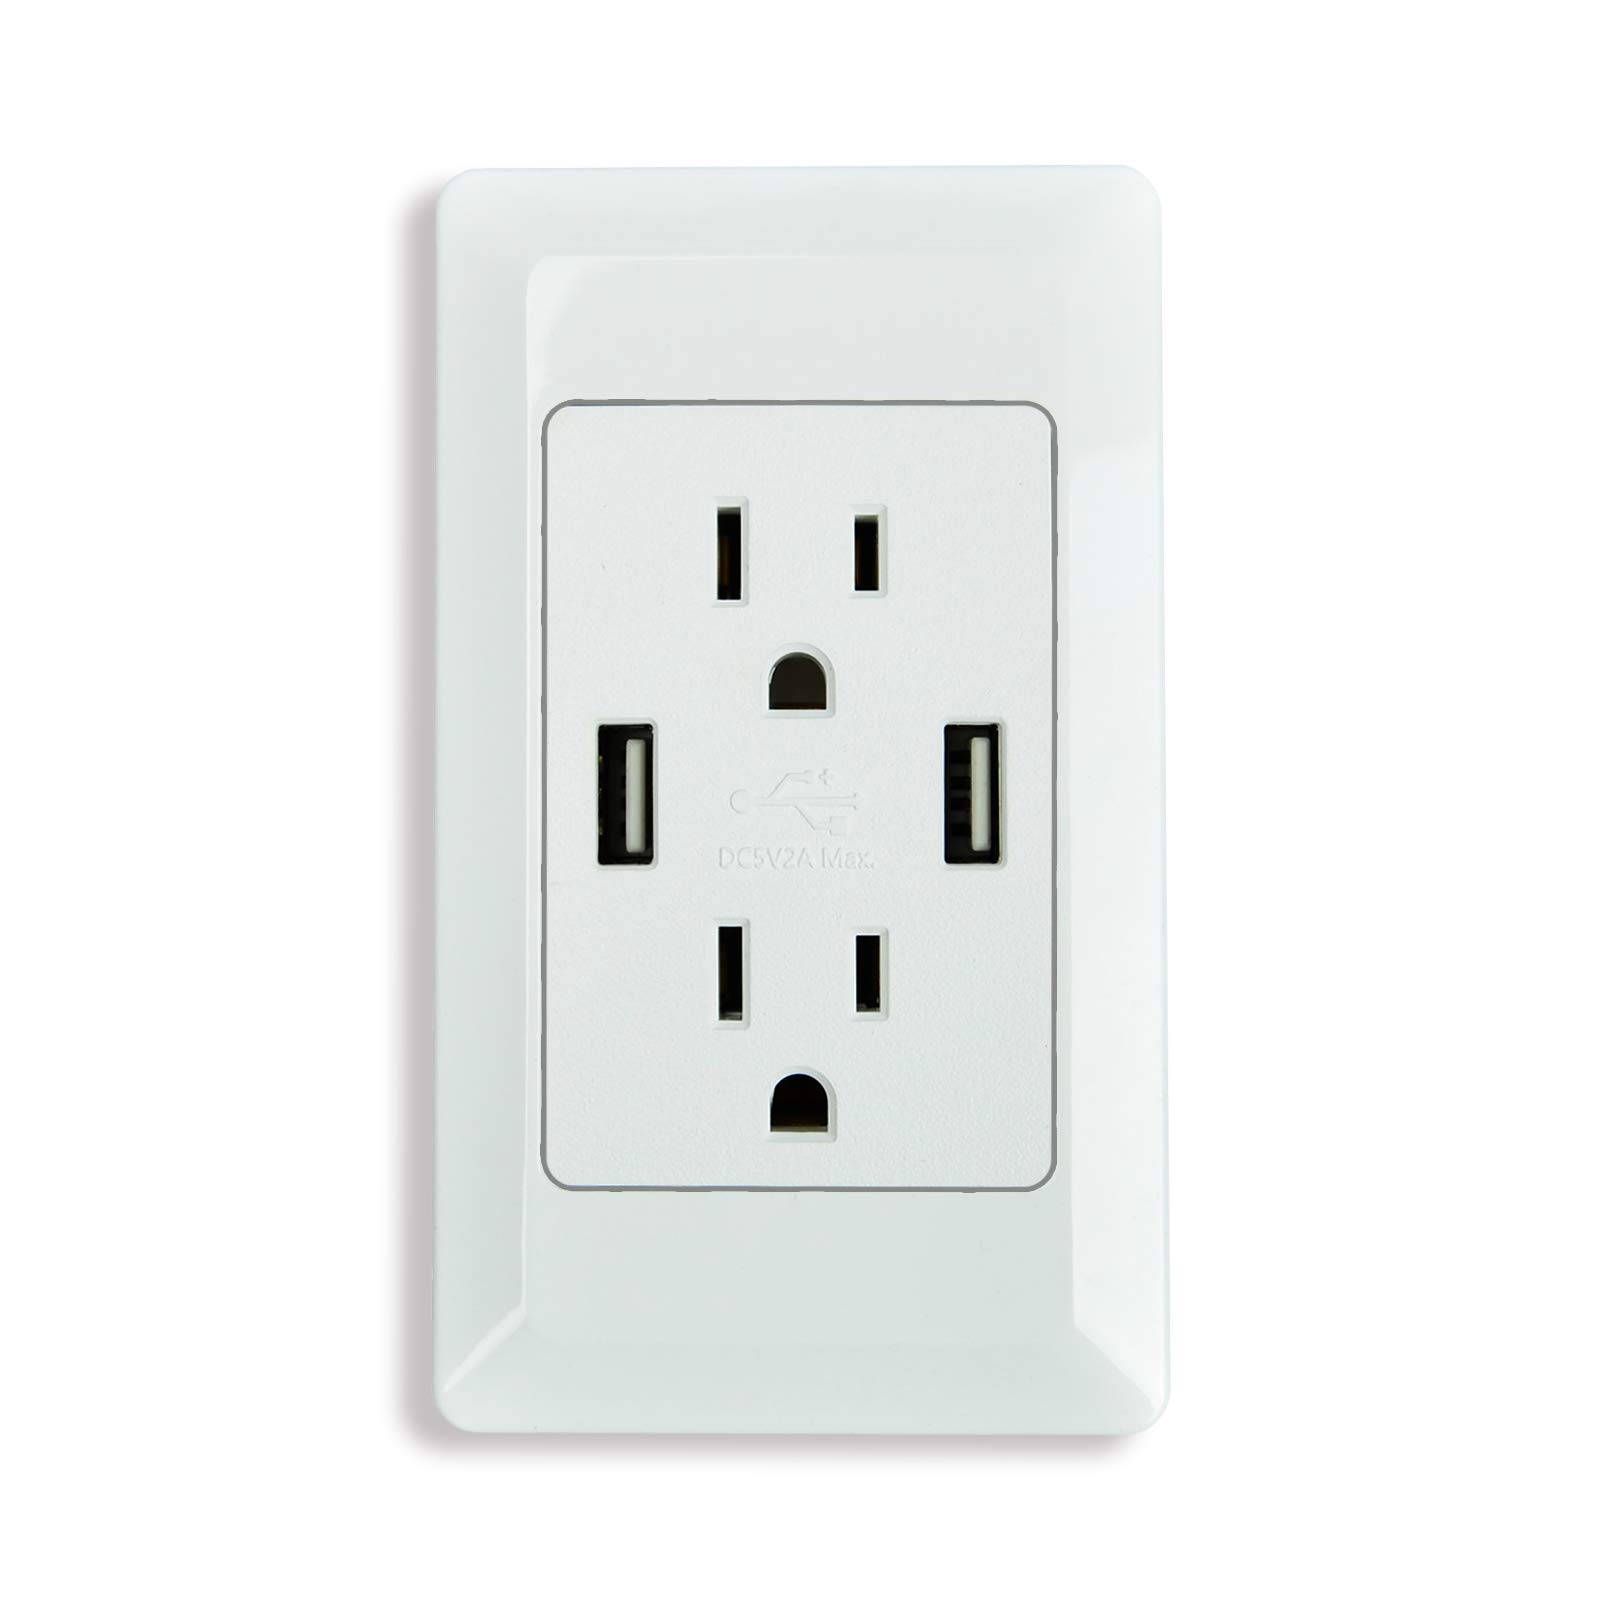 Power outlet with a plug